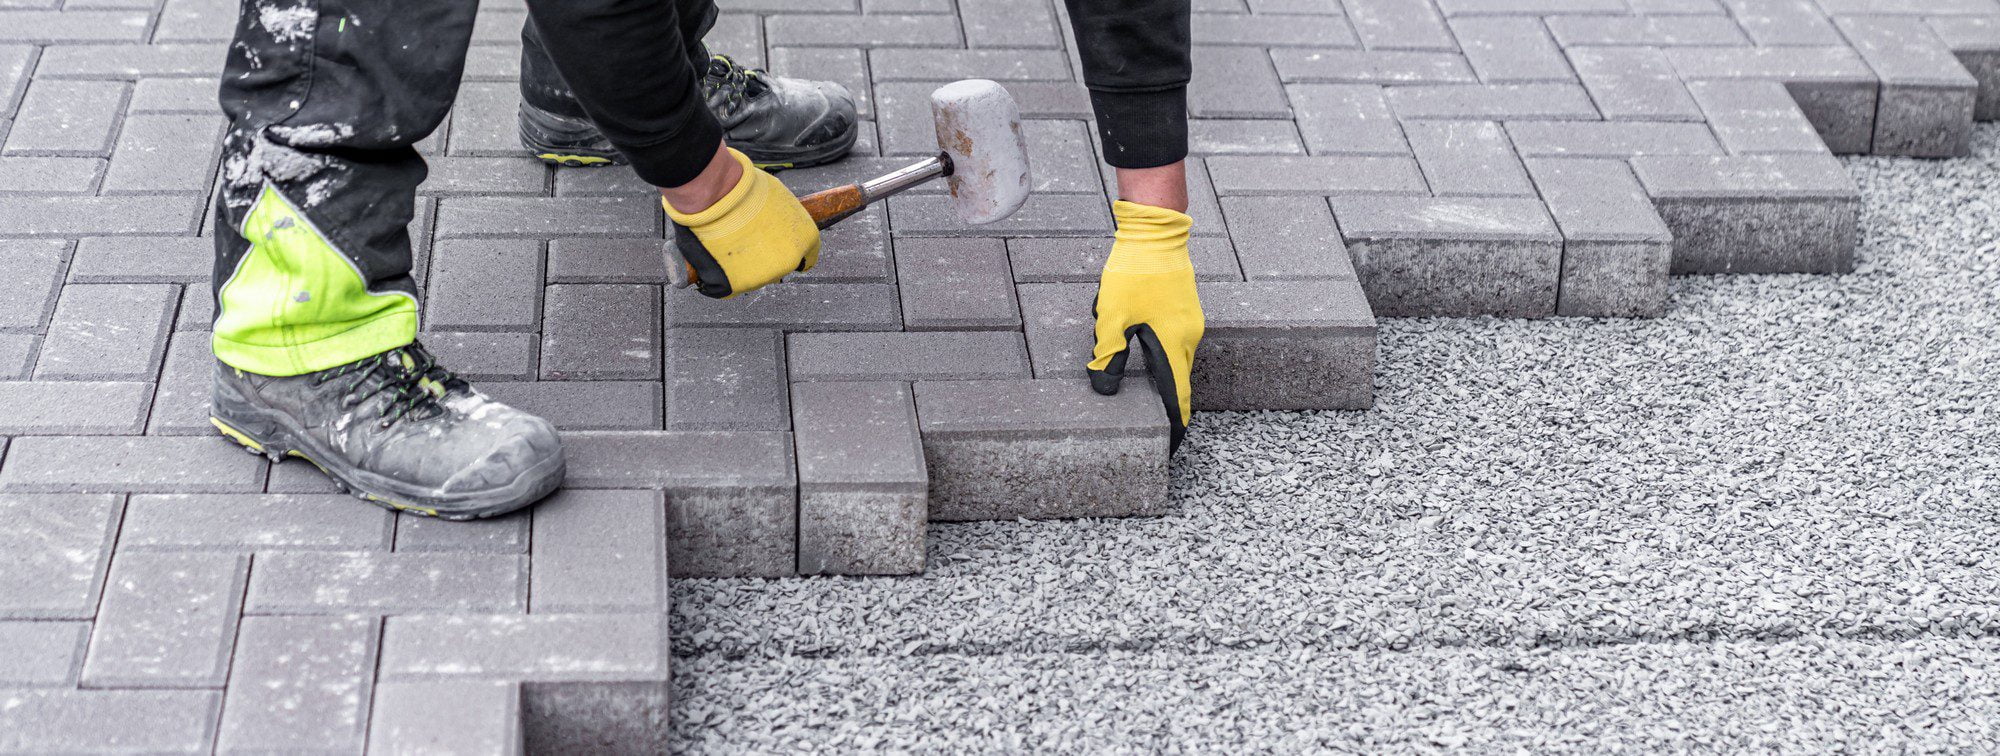 The image shows a person working on laying interlocking paving stones, commonly seen in driveway, sidewalk, or patio constructions. The worker is wearing safety gear, including a pair of gloves and a high-visibility stripe on their boot, which suggests adherence to safety regulations typically seen at construction sites. In their hands, they are holding a rubber mallet and paving stone, indicating they are in the process of installing or adjusting the pavers into position. The area that has yet to be paved is filled with a layer of gravel, which is used as a base material for the pavers to ensure proper drainage and a stable surface. The worker’s stance and the arrangement of the materials suggest they are focused on precision and quality in their work.